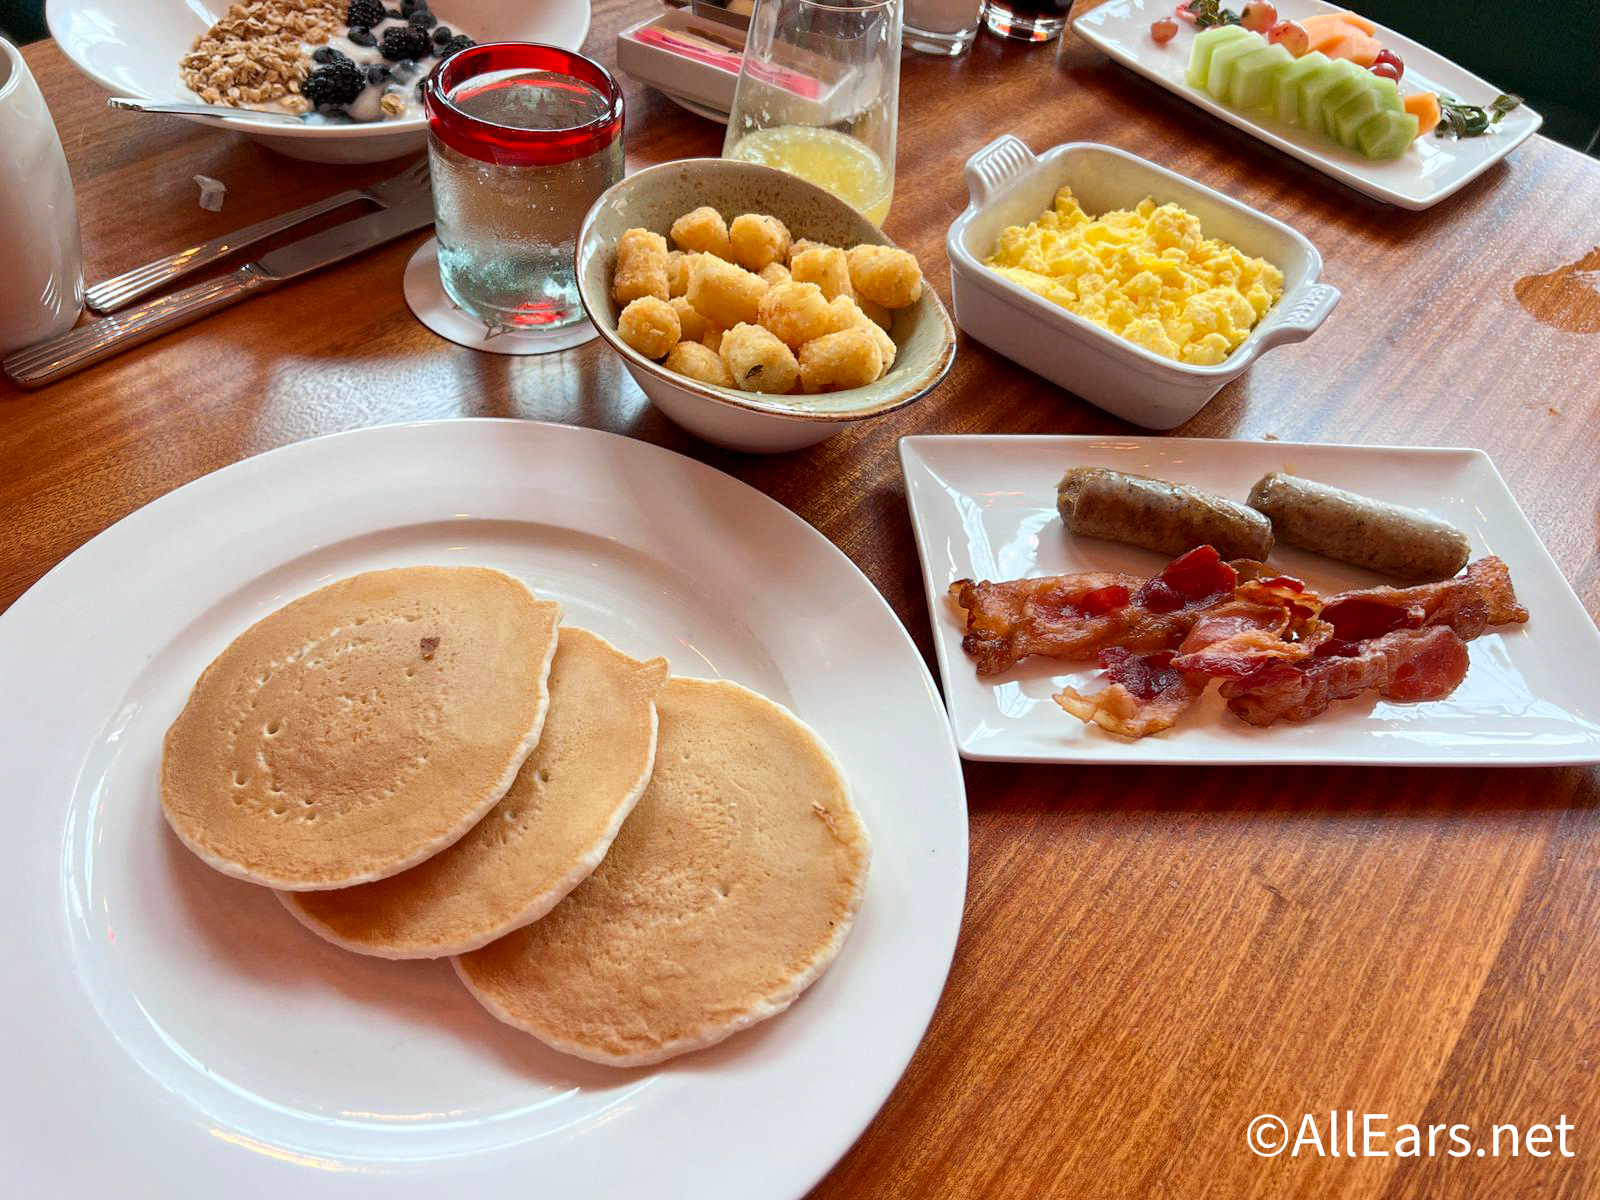 HURRY! Tickets Now on Sale for Breakfast With Santa in Disney World ...